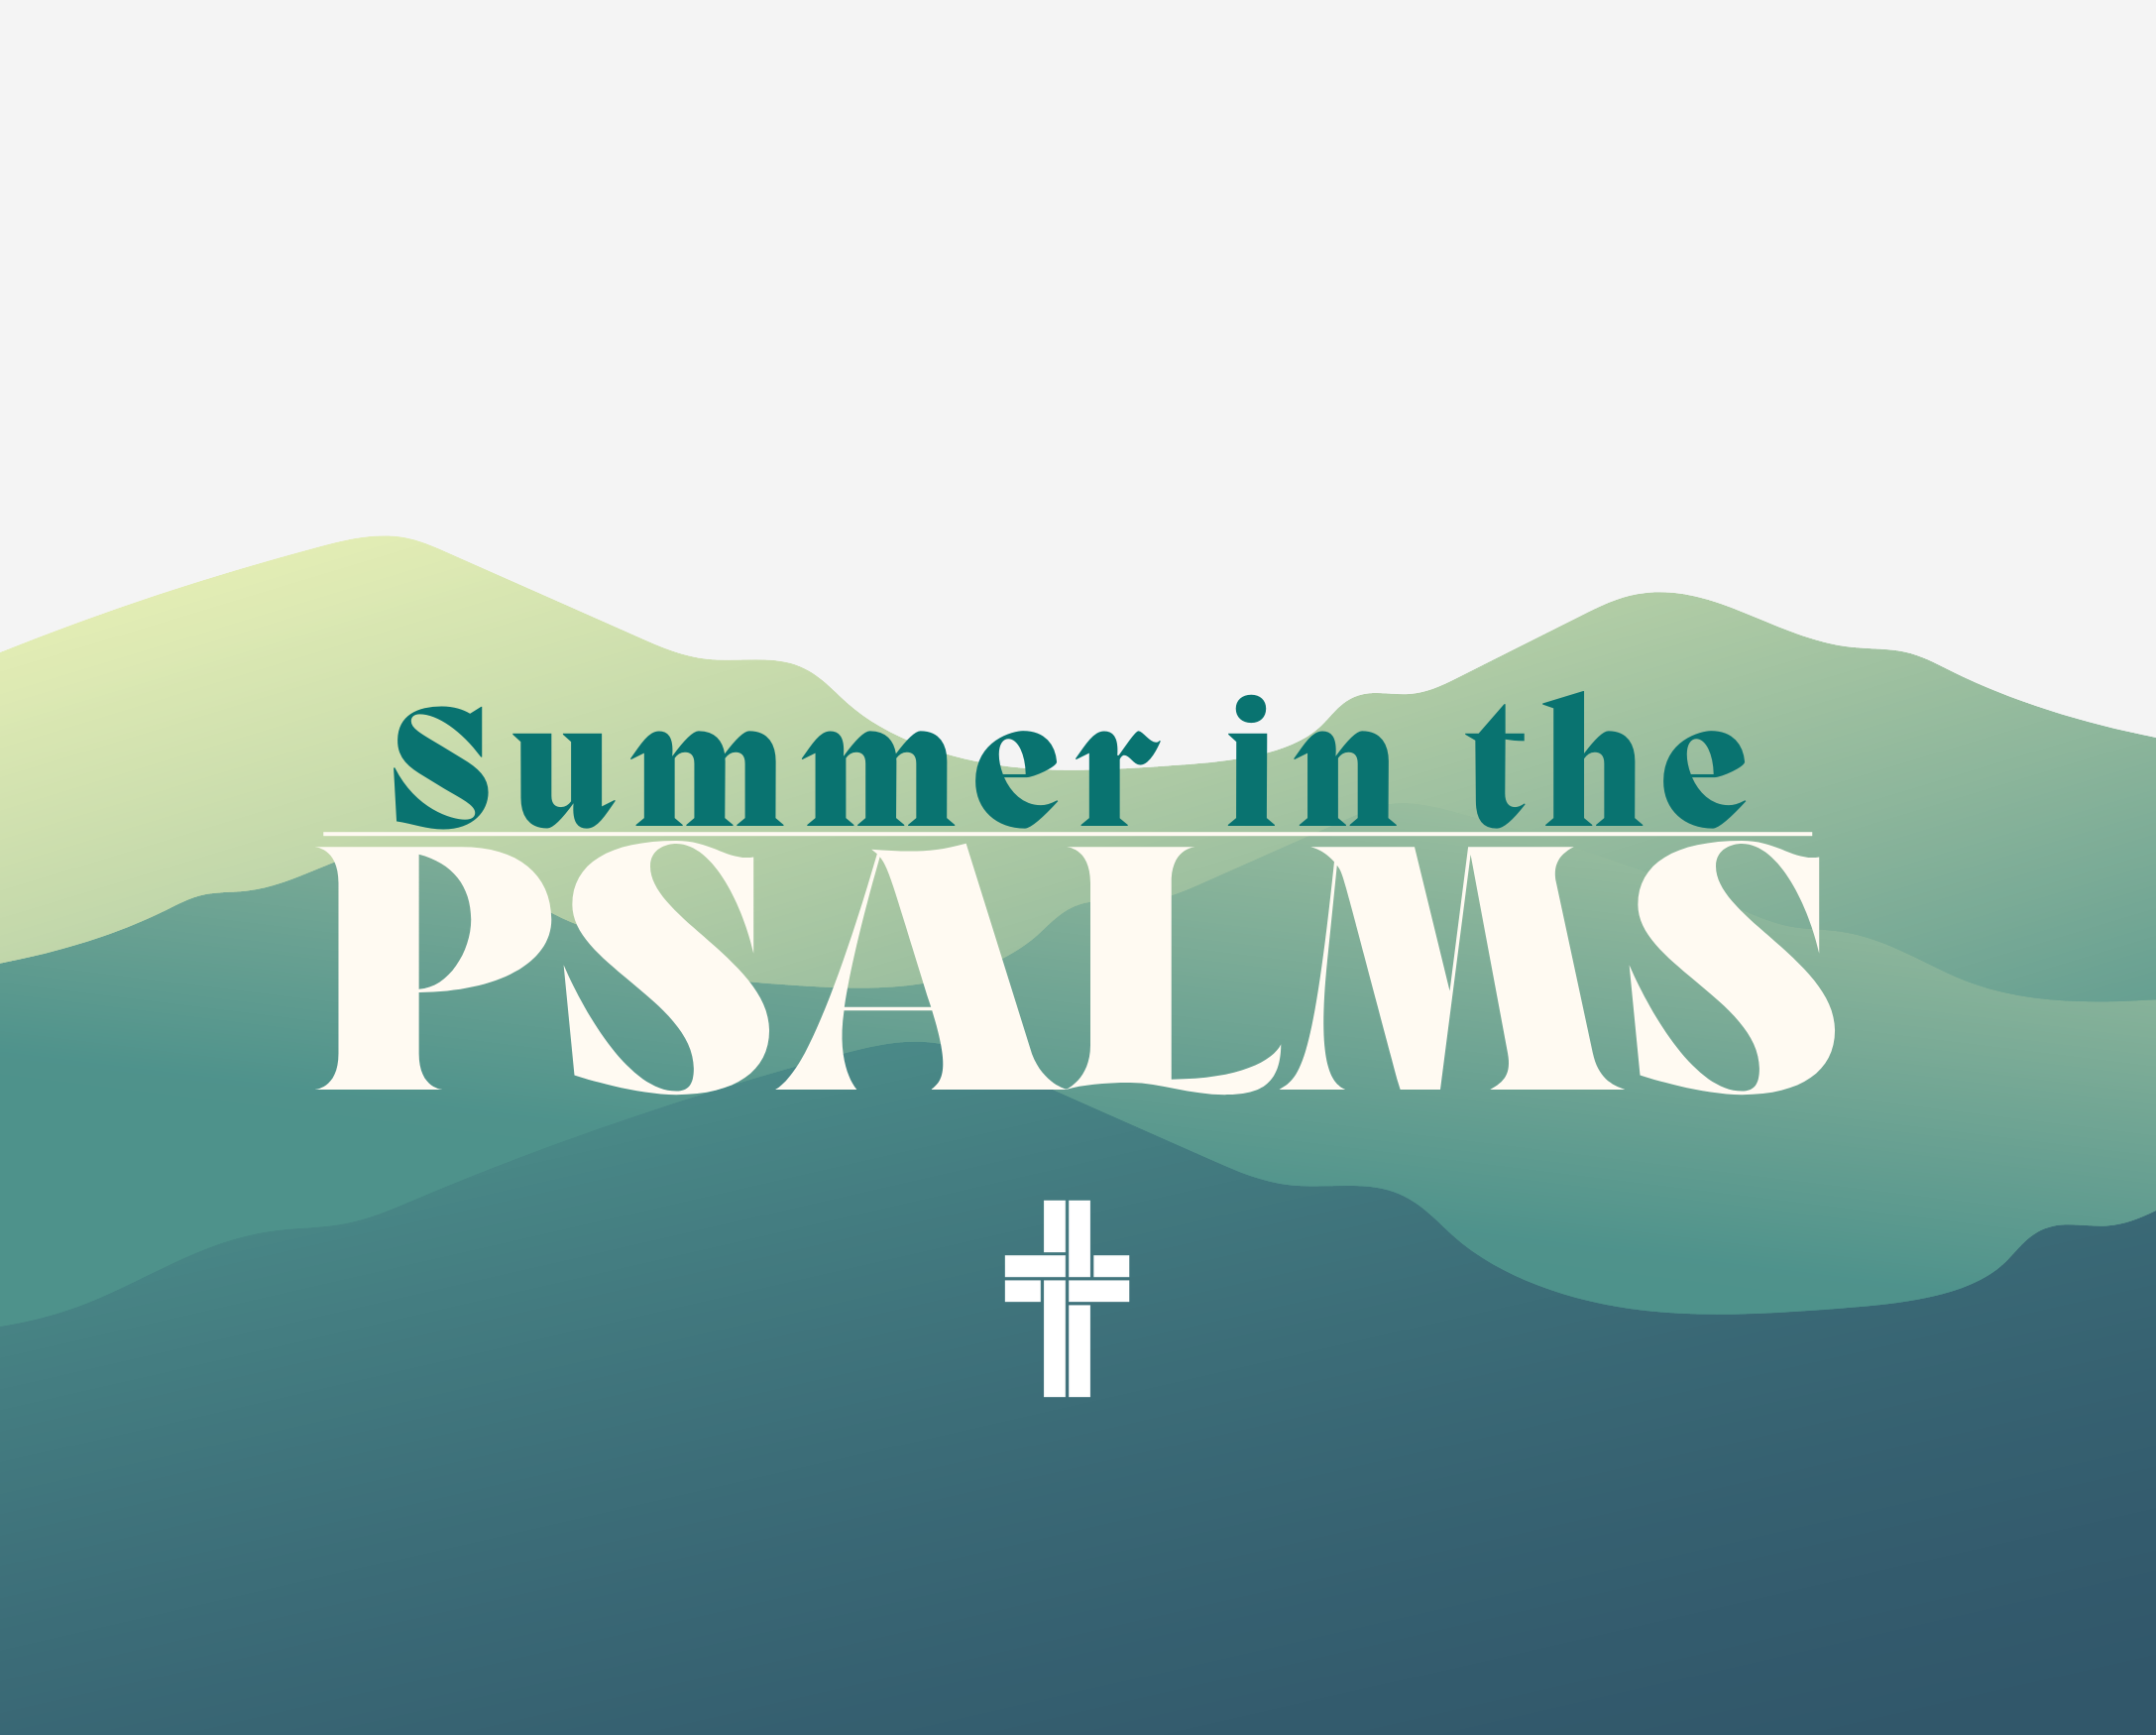 Summer in the Psalms: Praise the Lord!